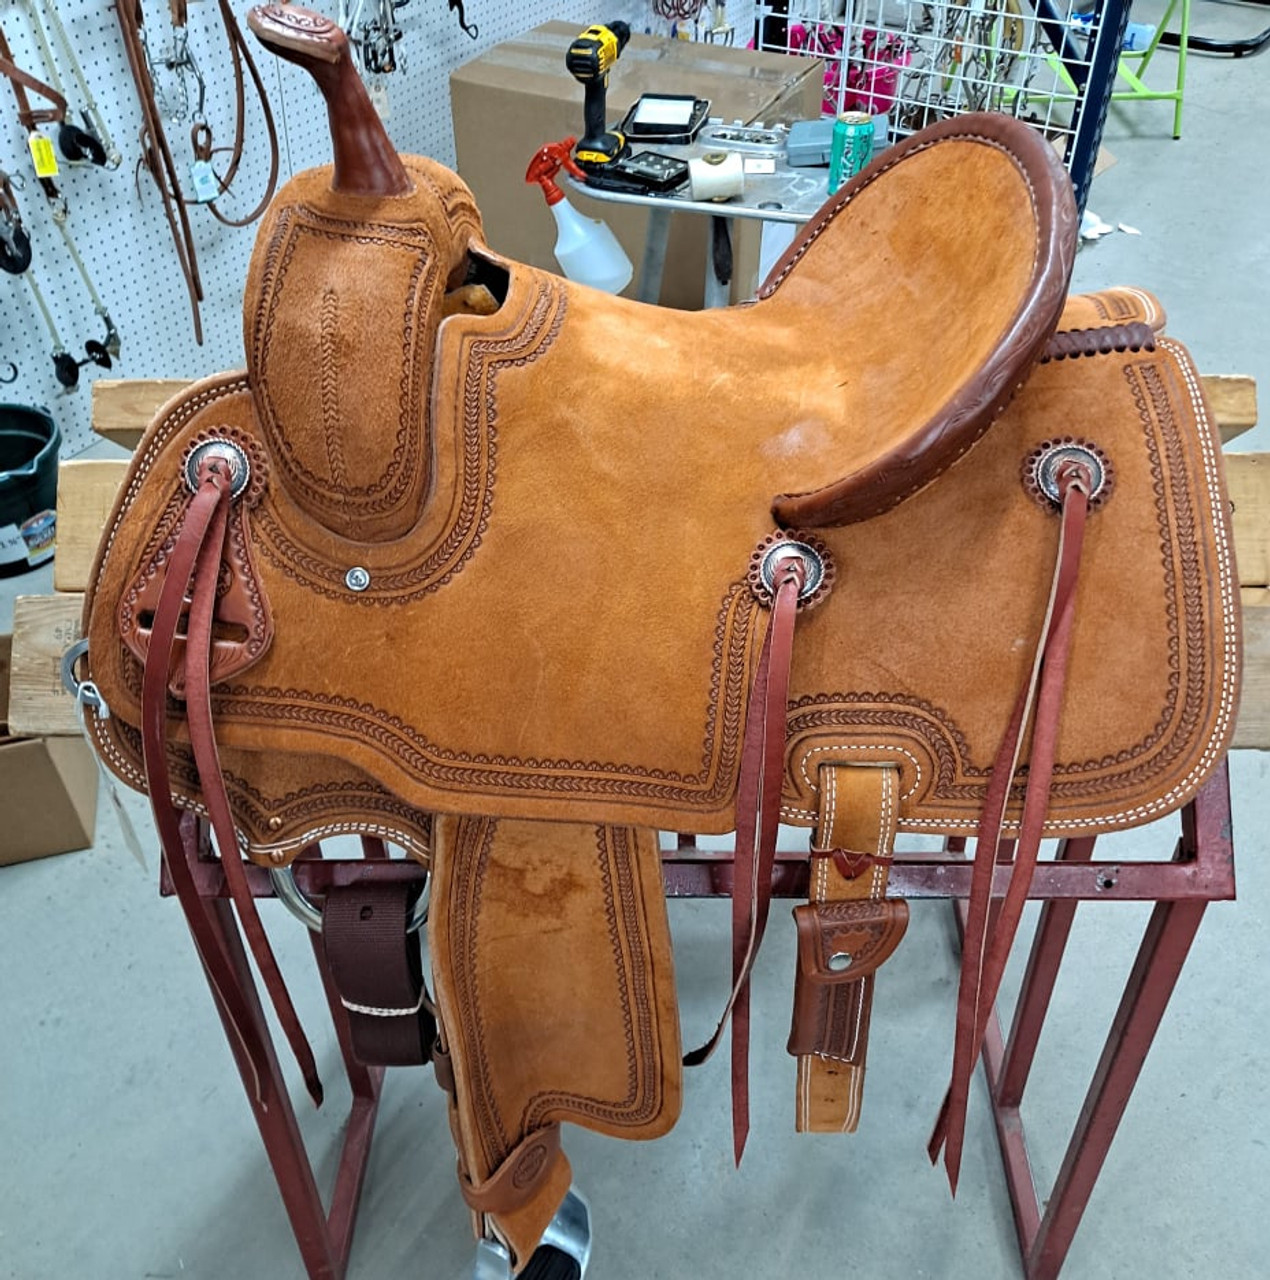 New Jackson Stock Saddle by Fort Worth Saddle Co with 13.5 inch seat. Hermann Oak leather. 6 gear strings. Rust colored roughout with border tool. Secure pencil roll seat. Gullet size is 8 inch, weight is 28lbs, and skirt is 26 inch. Made in USA. Limited lifetime warranty.

S1439